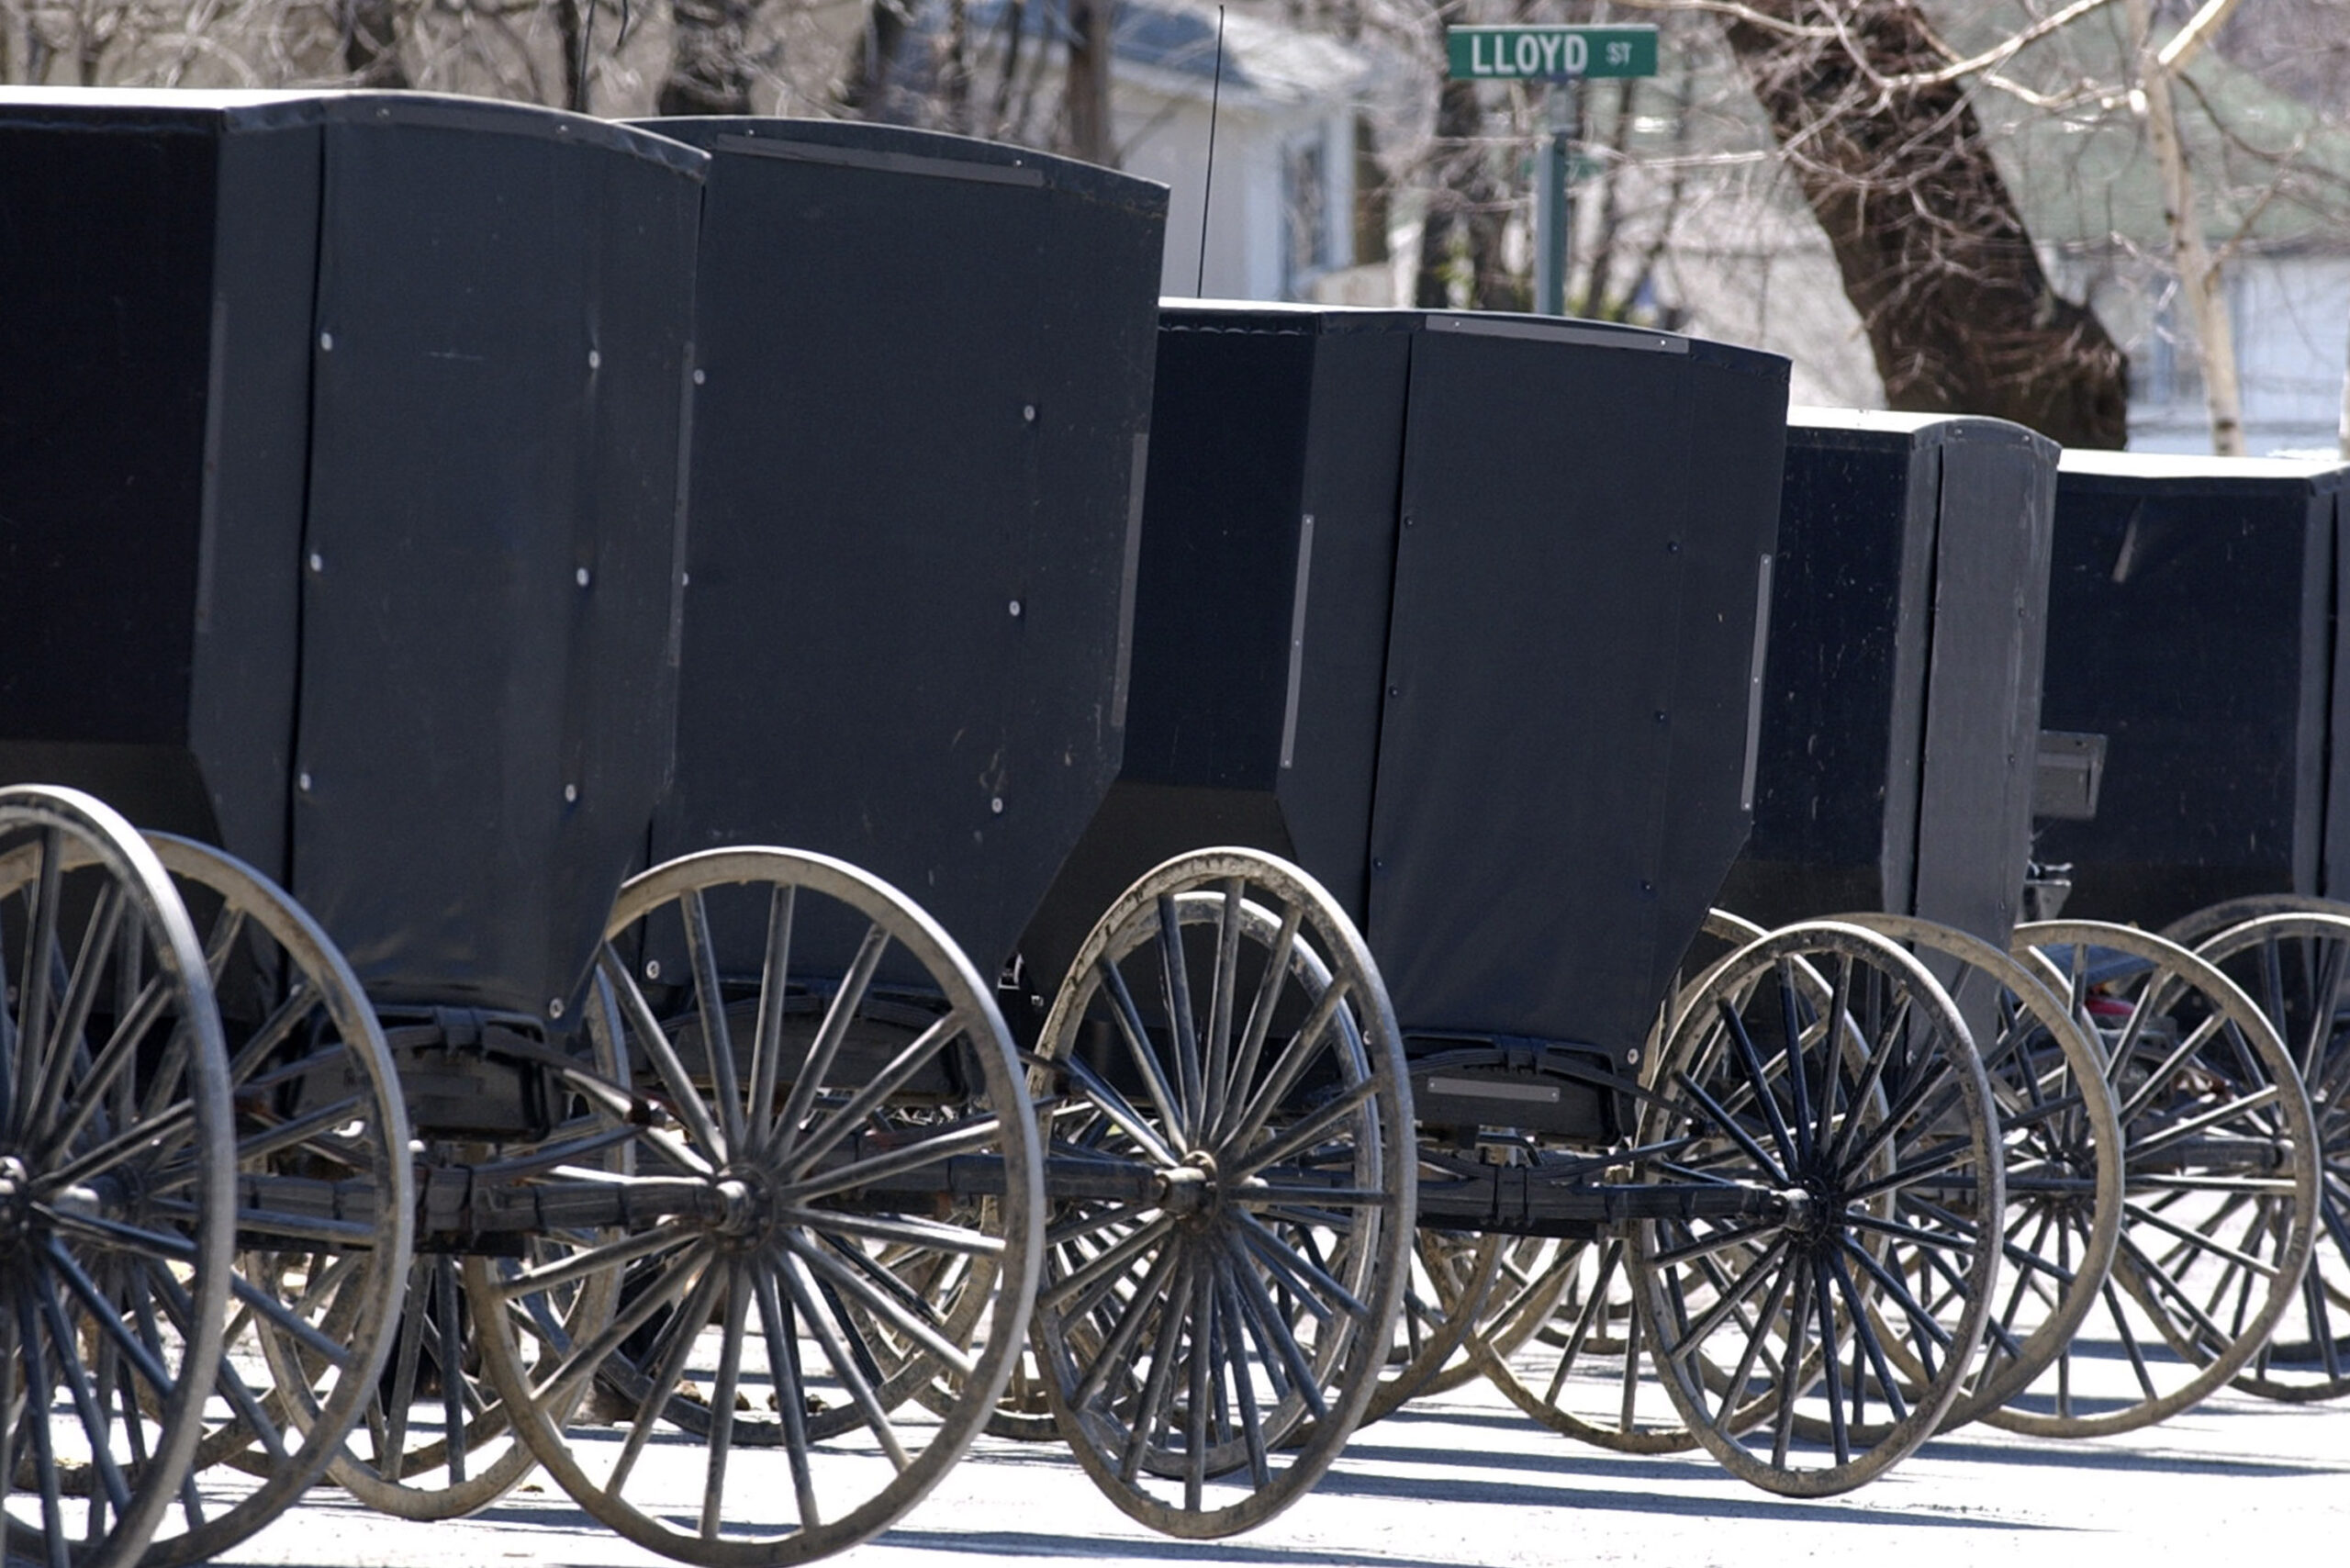 FILE - This April 10, 2002 photo shows Amish buggies of the Swartzentrubers Amish sect parked outsi...